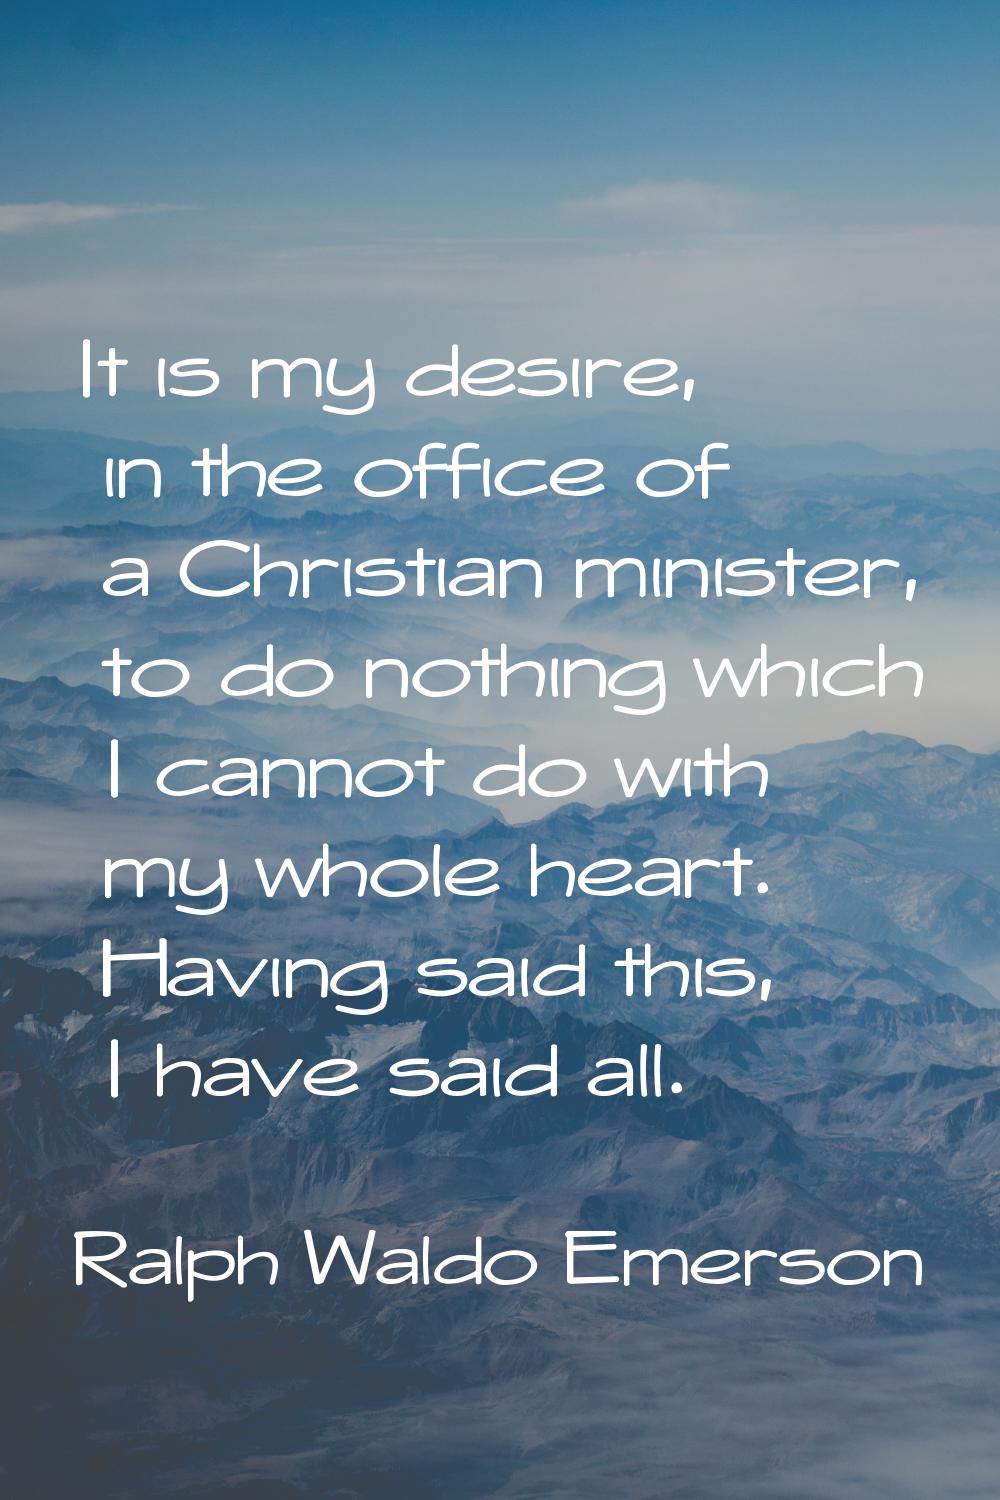 It is my desire, in the office of a Christian minister, to do nothing which I cannot do with my who